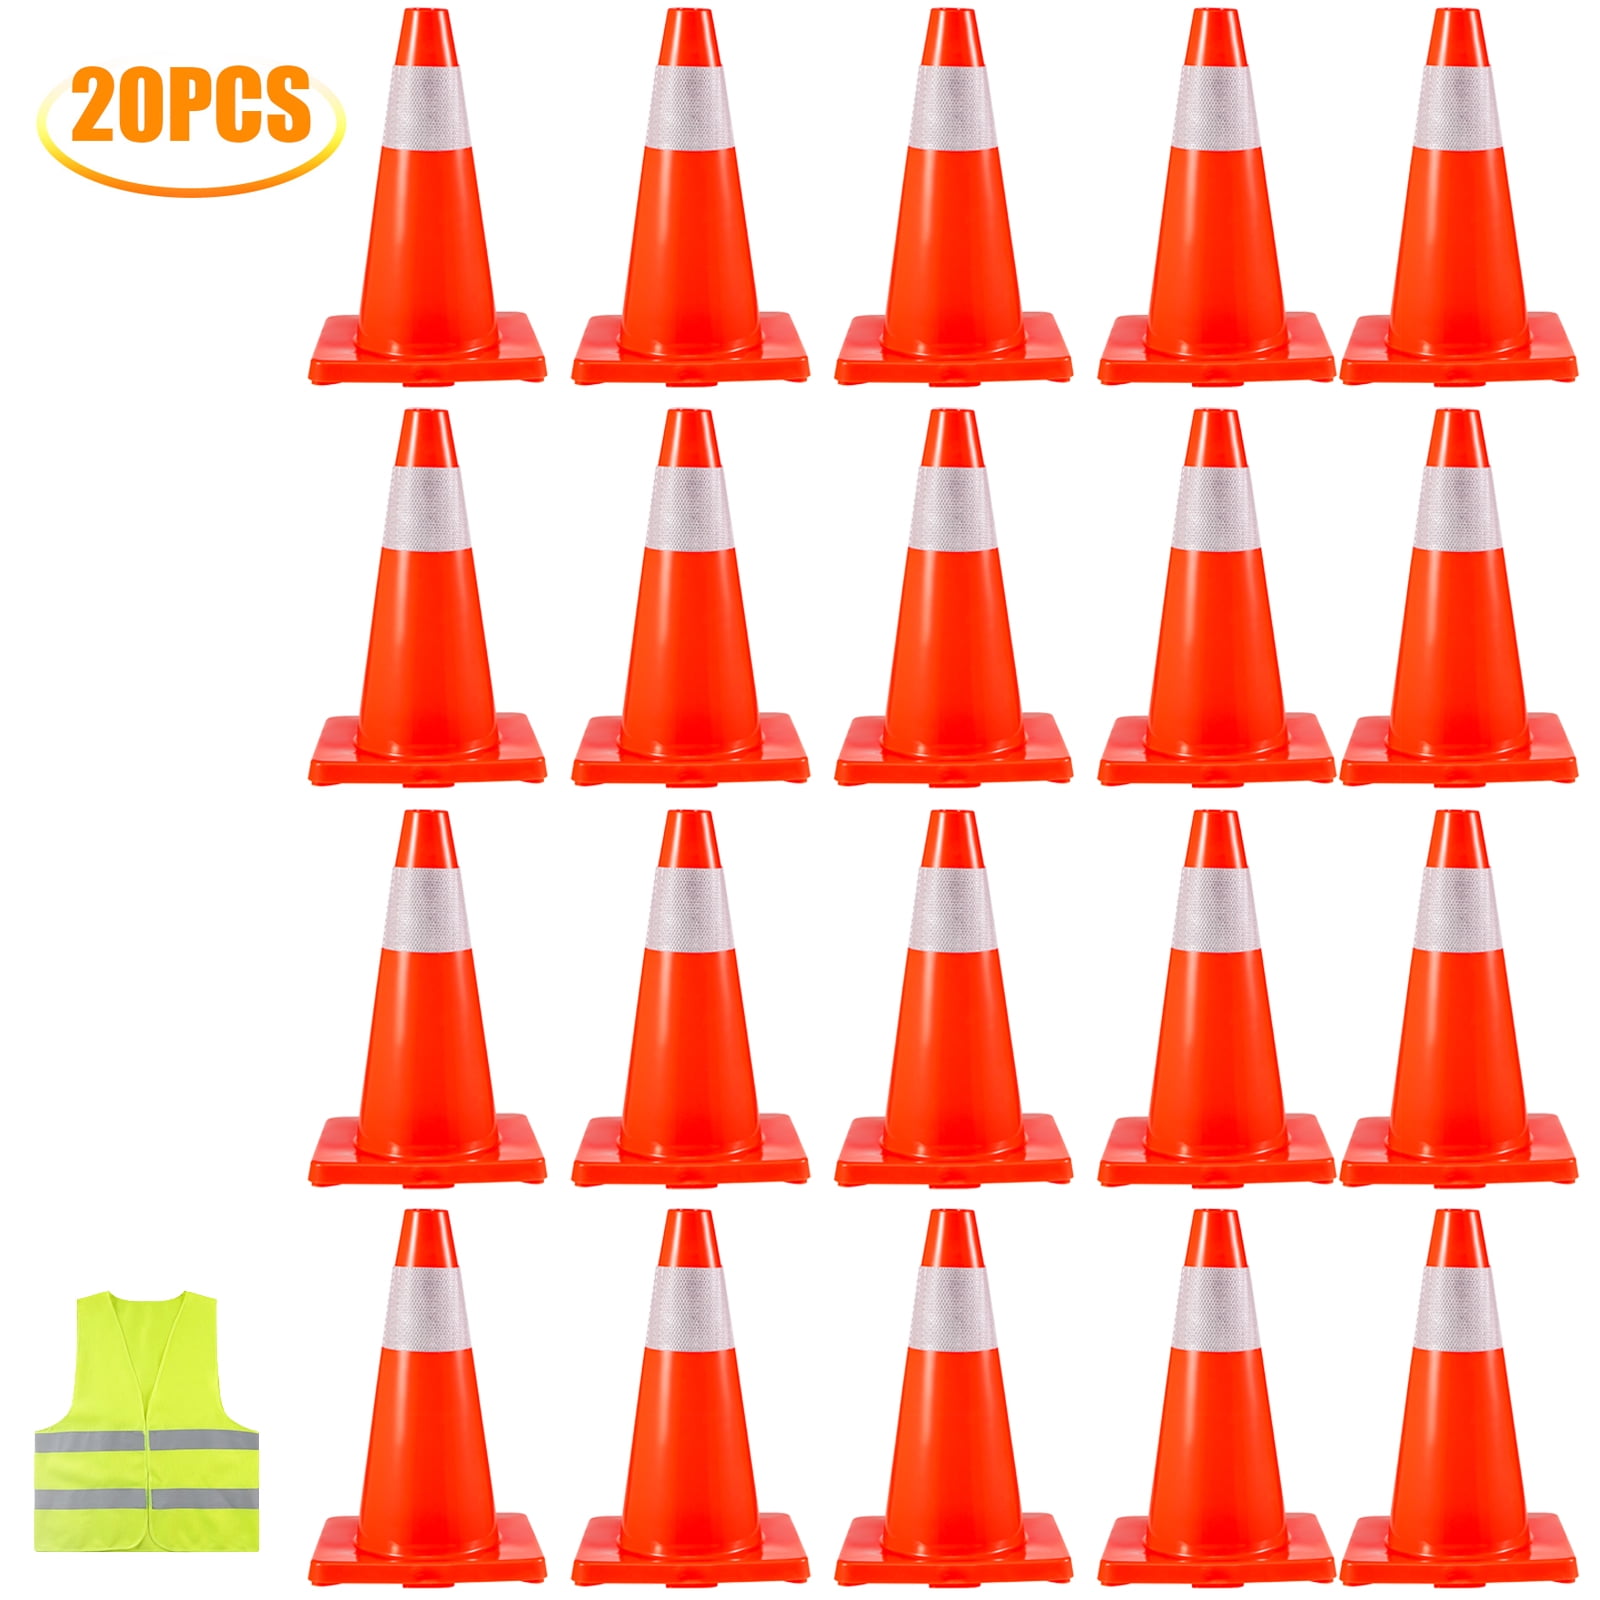 Folded 18" Traffic Cones Overlap Parking Construct Emergency Road Safety Cone US 